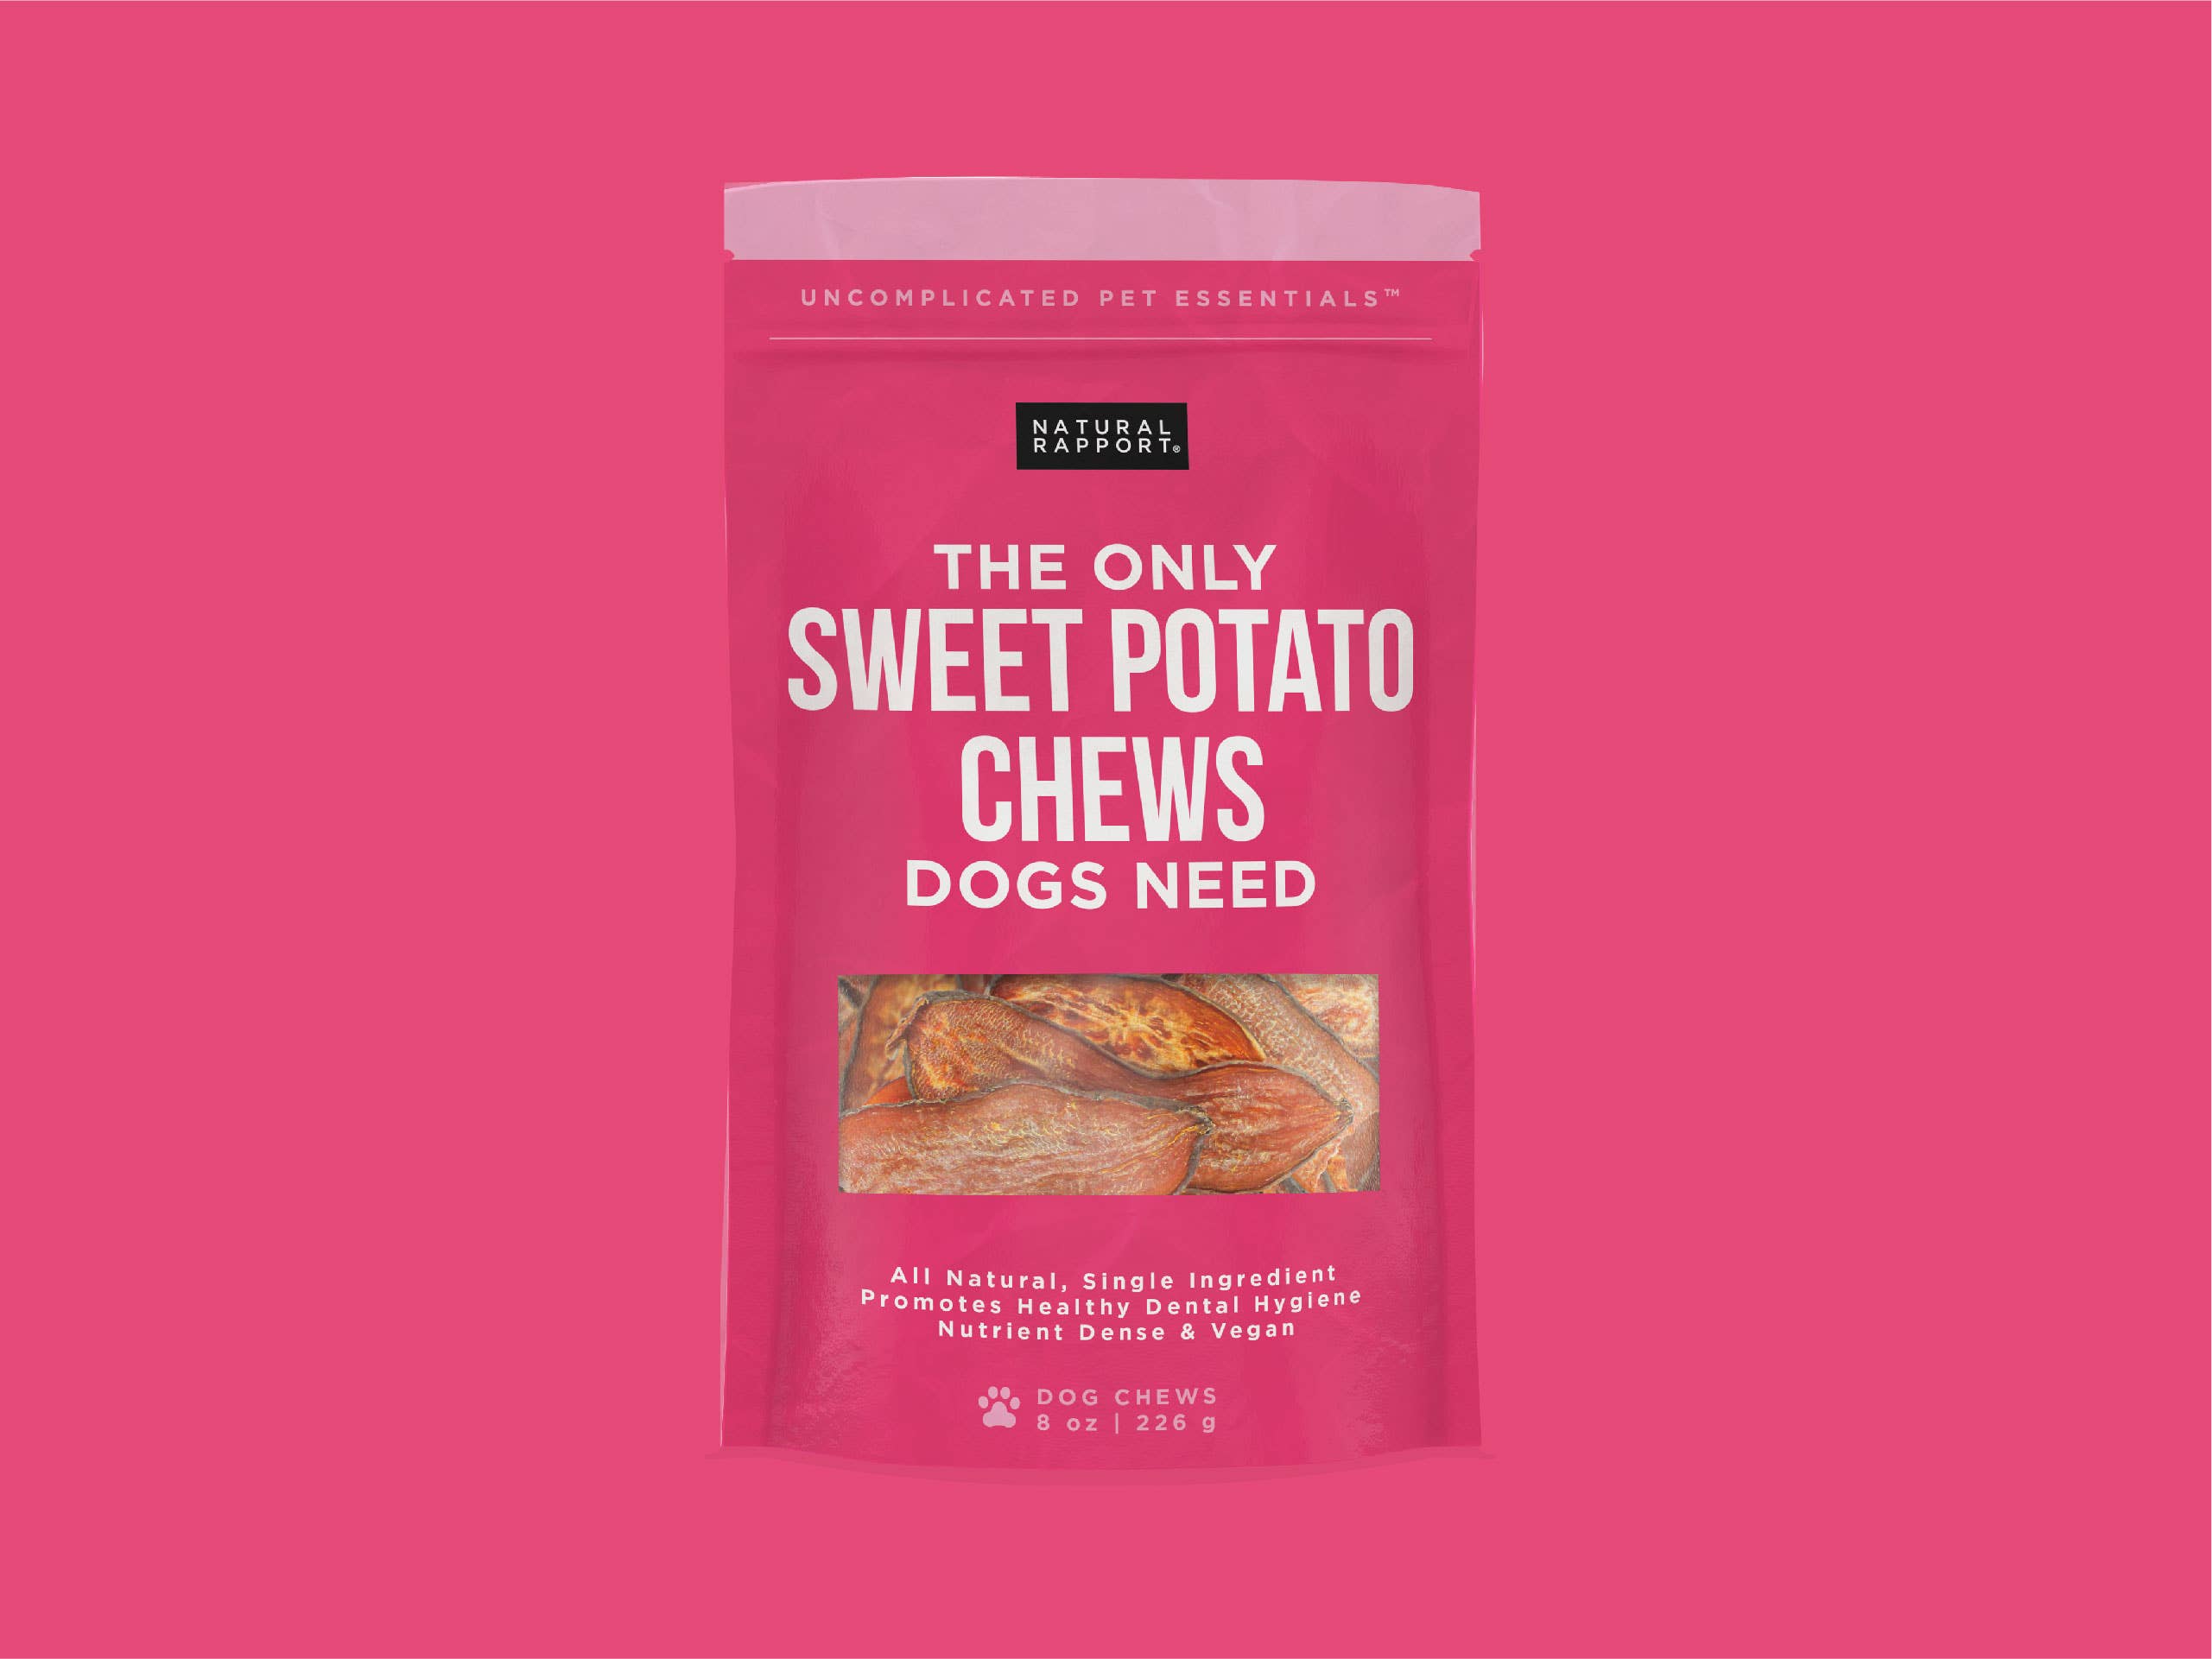 Natural Rapport - The Only Sweet Potato Chews Dogs Need